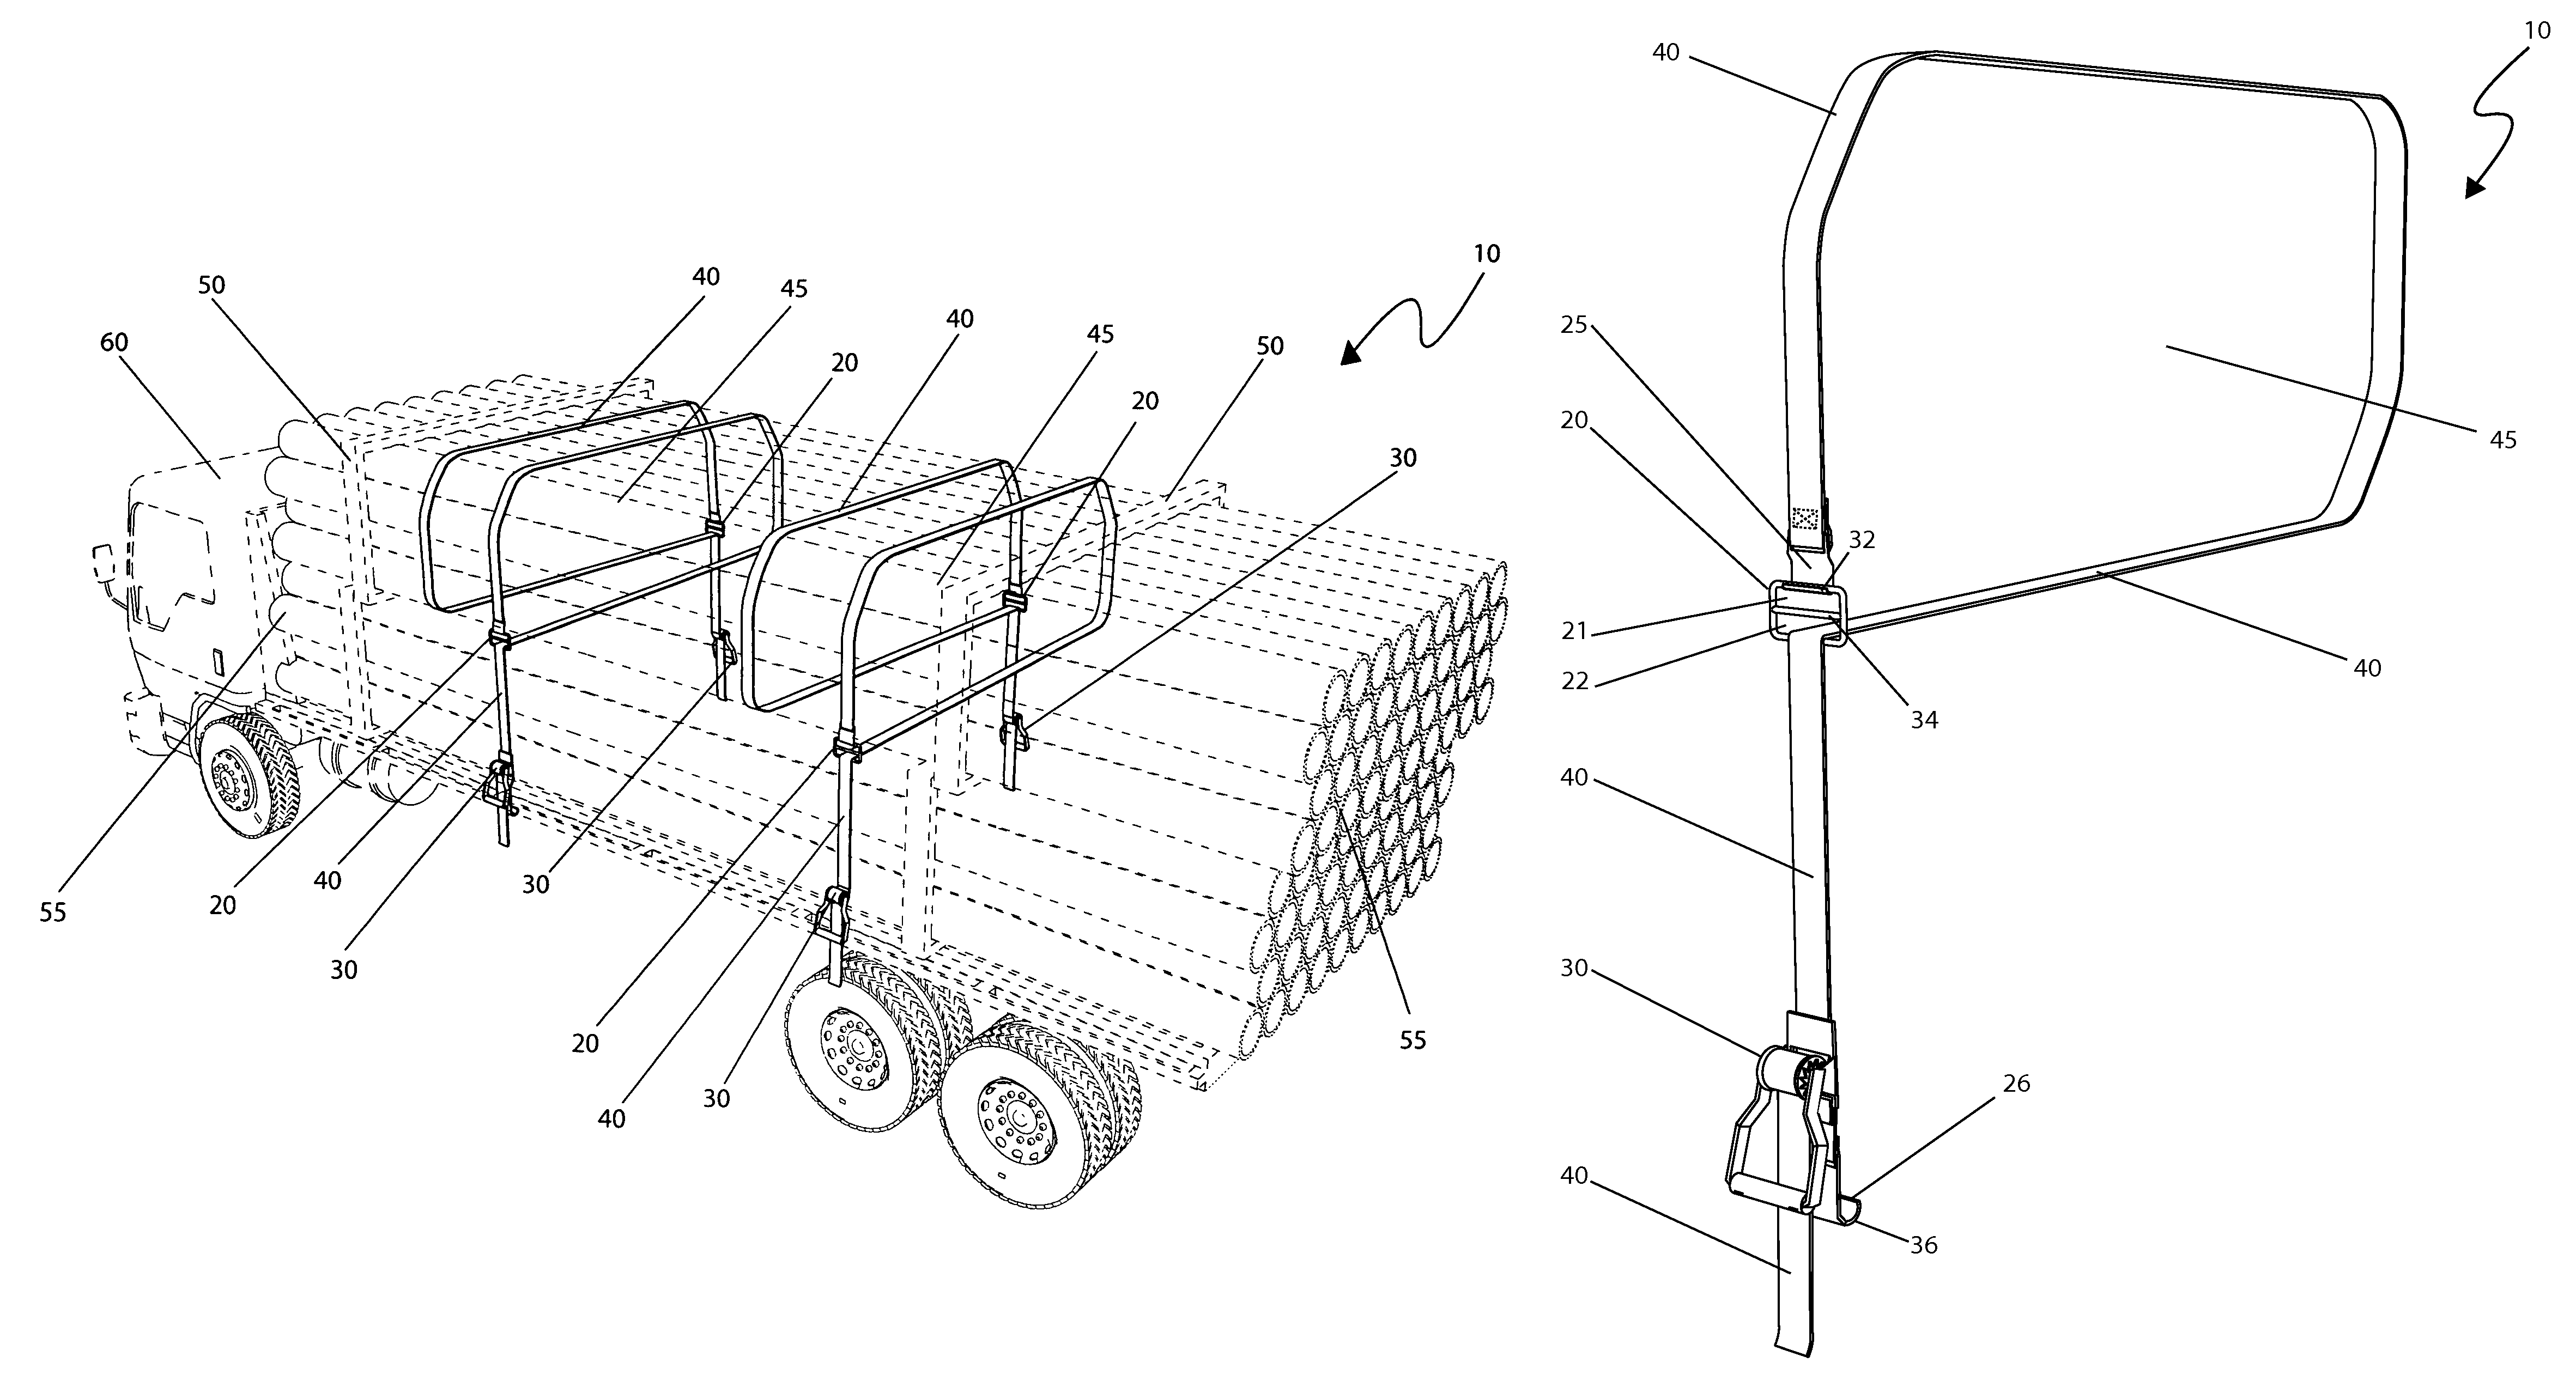 Strap links stabilizing system for flatbed trucks and associated use therefor